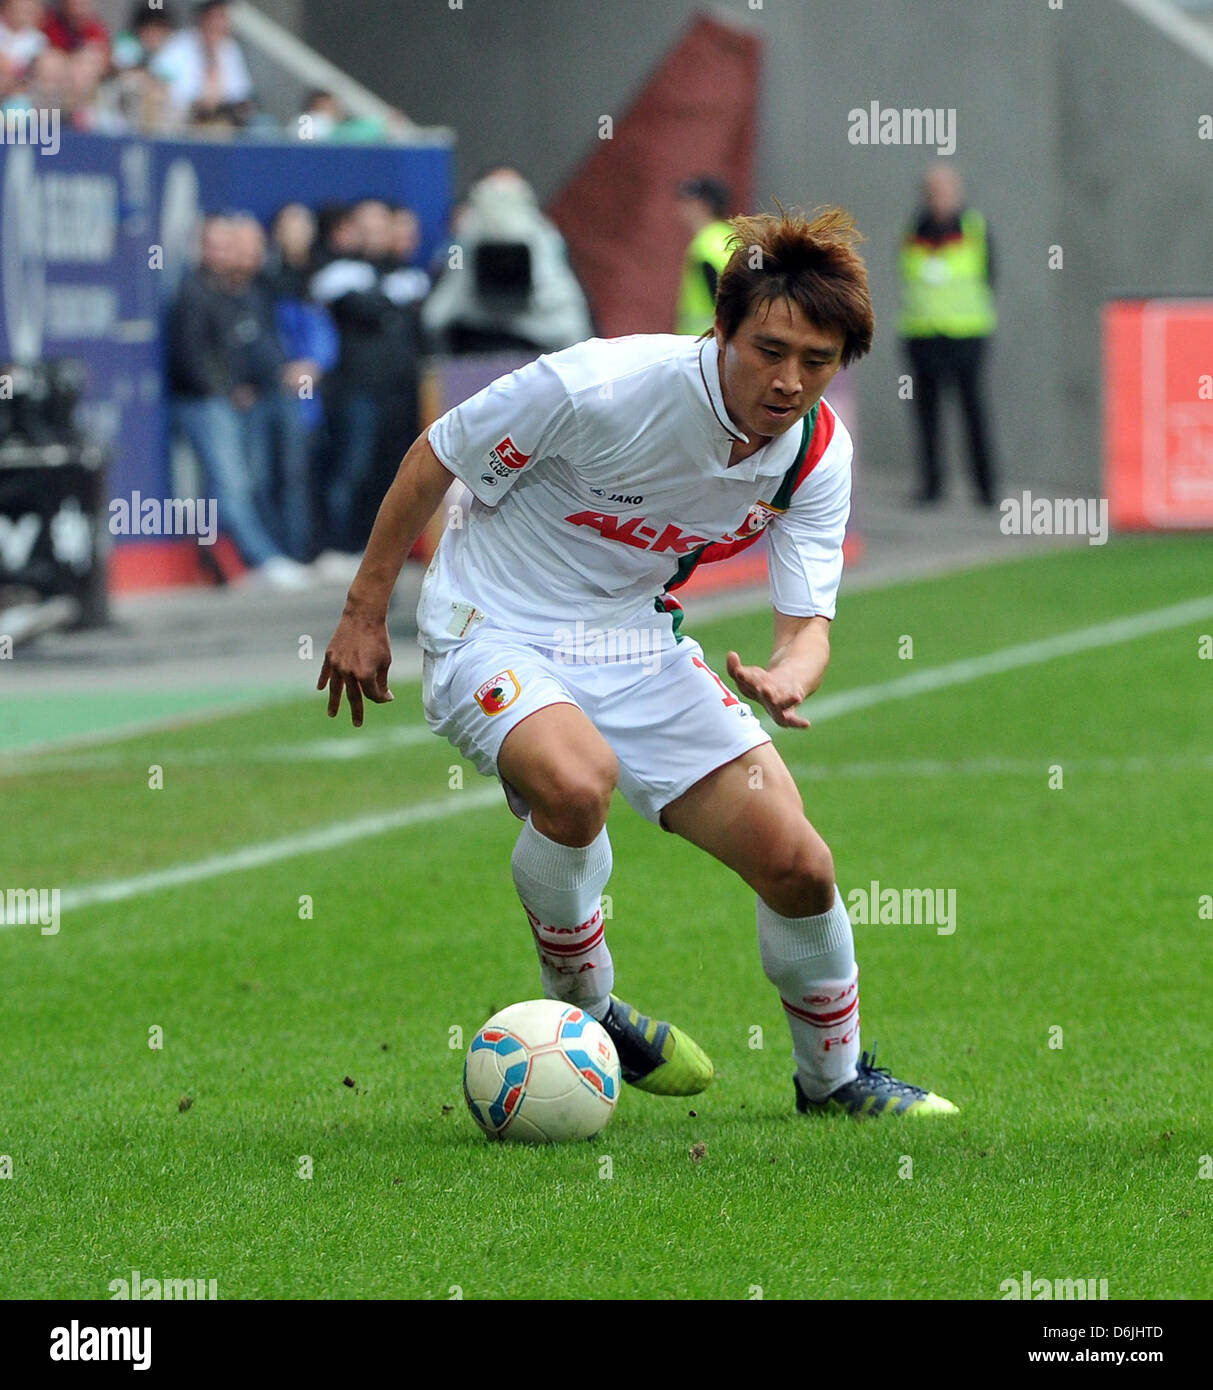 Augsburg's Ja-Cheol Koo controls the ball during the Bundesliga match FC Augsburg versus  1.FSV Mainz 05 at SGL-Arena in Augsburg, Germany, 17 March 2012. Augsburg won 2-1. Photo: Stefan Puchner Stock Photo